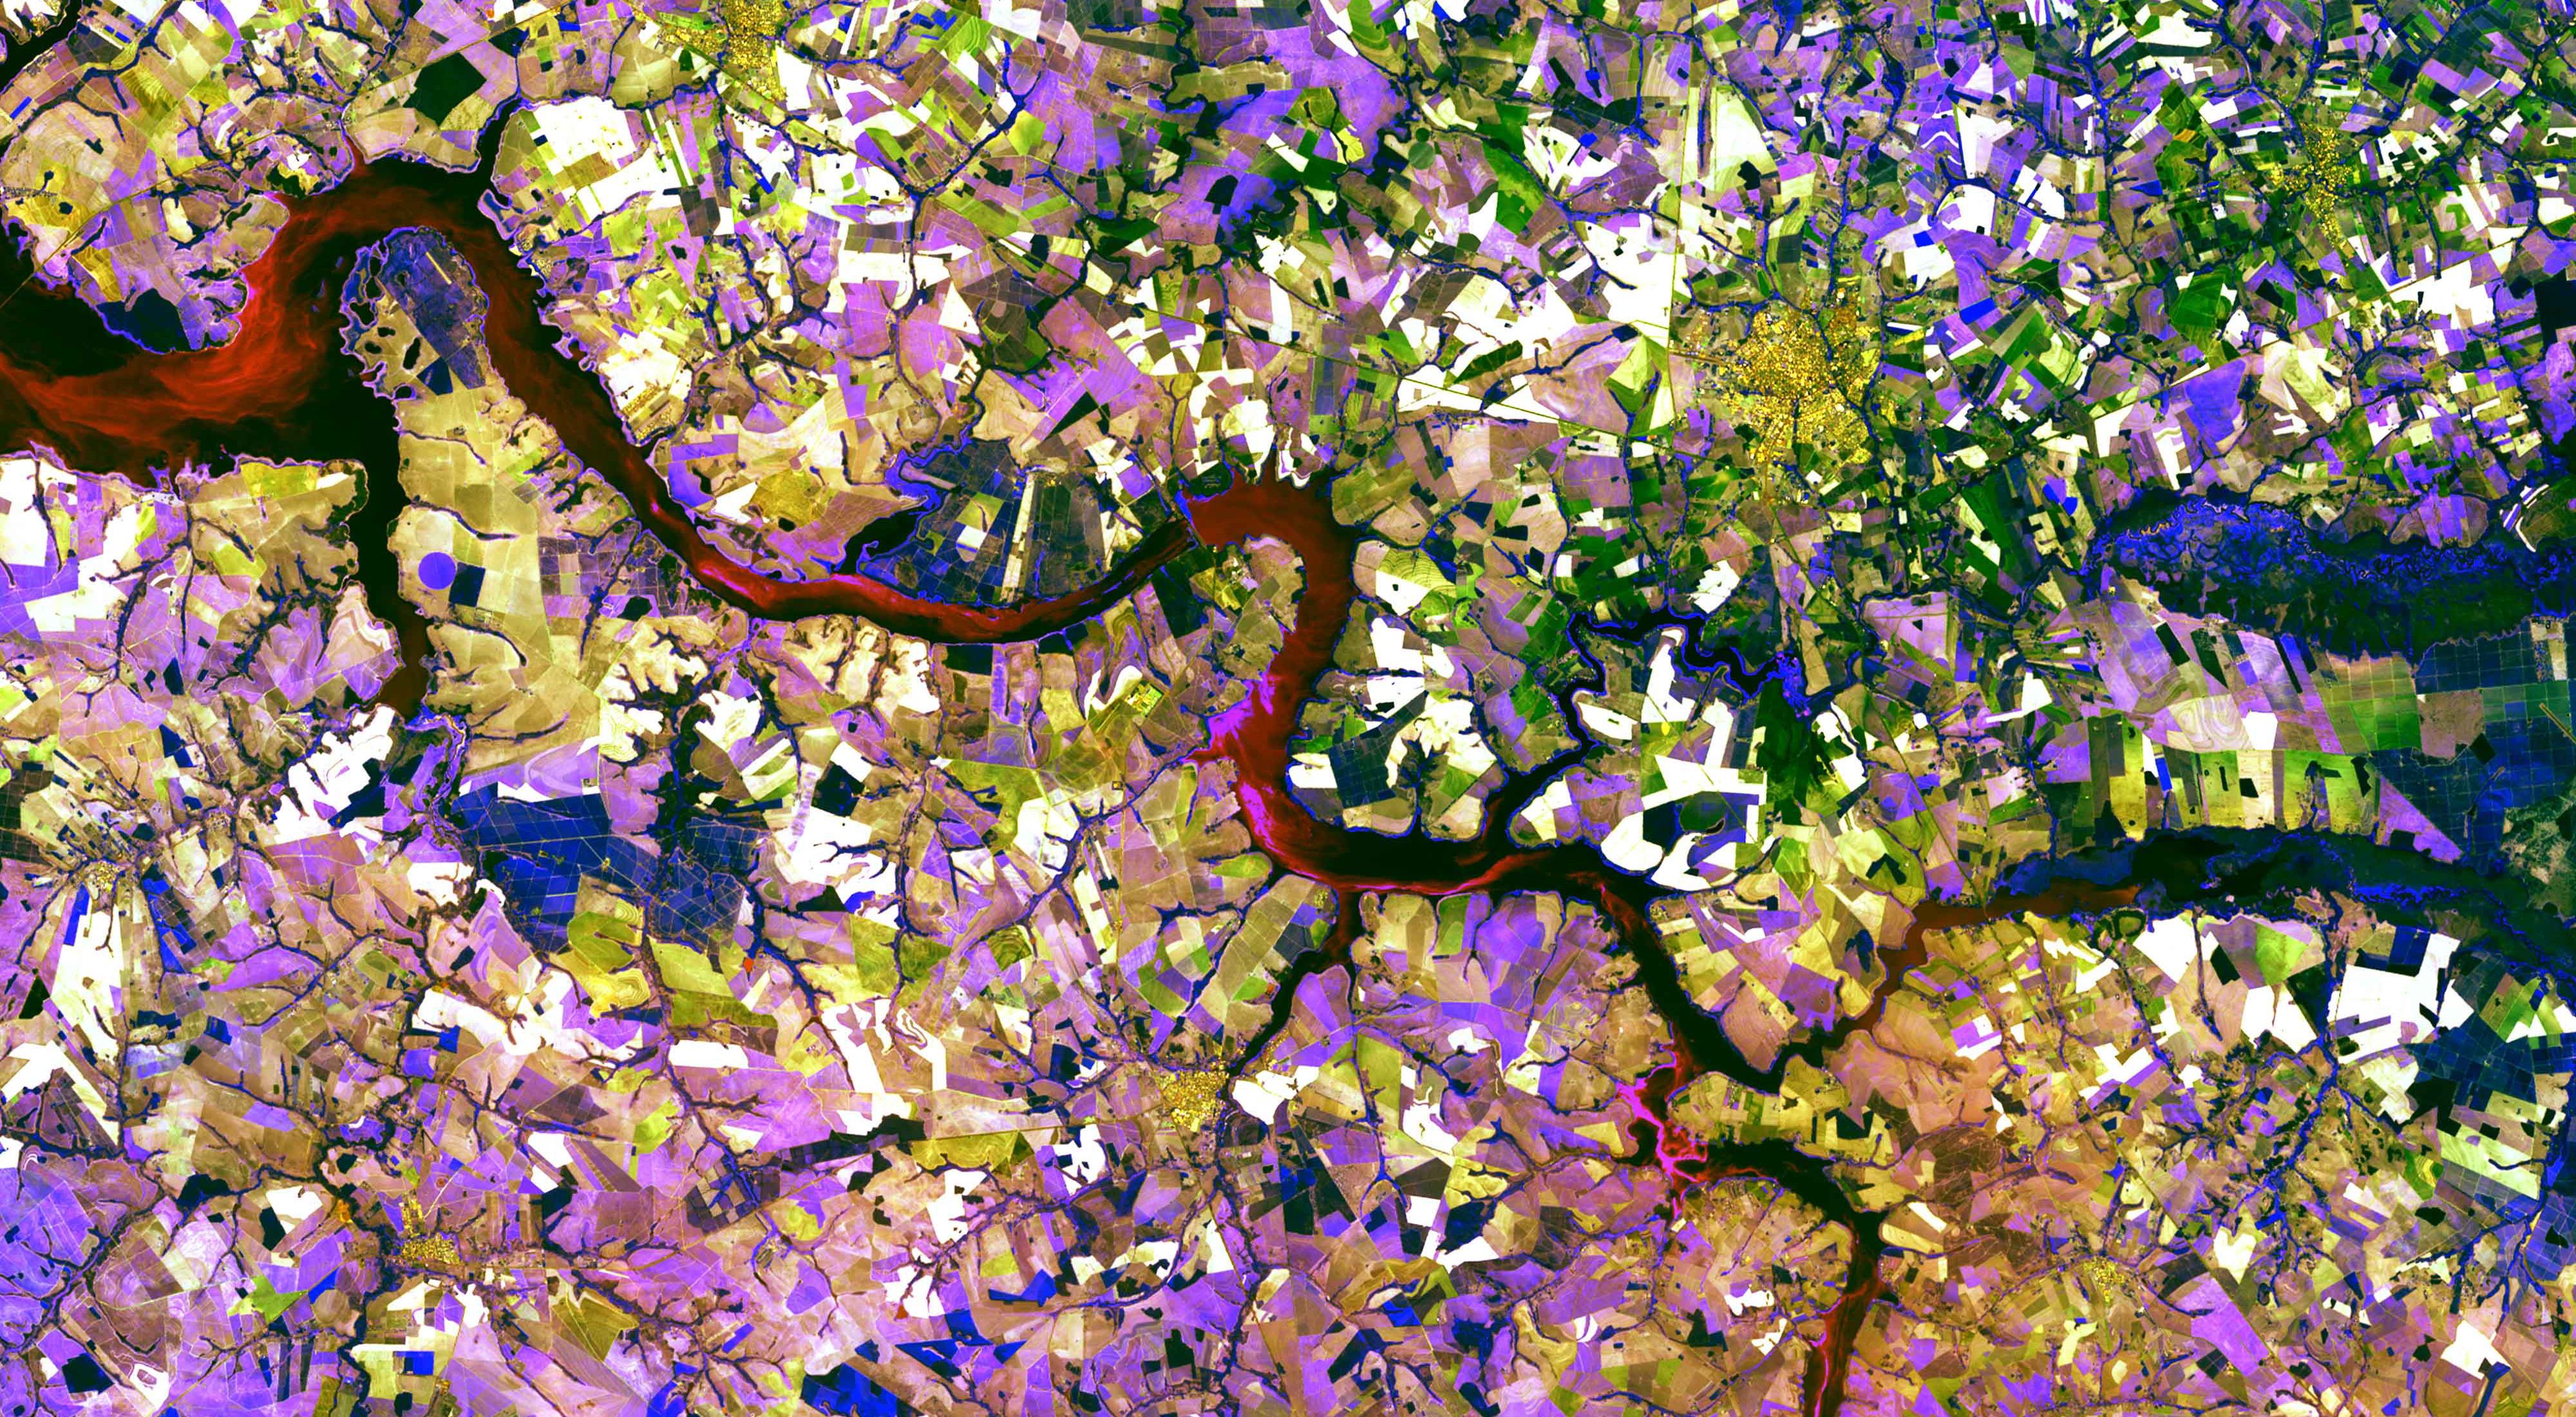 An aerial view of a river snaking through agricultural fields highlighted with different colors to indicate different crop types.